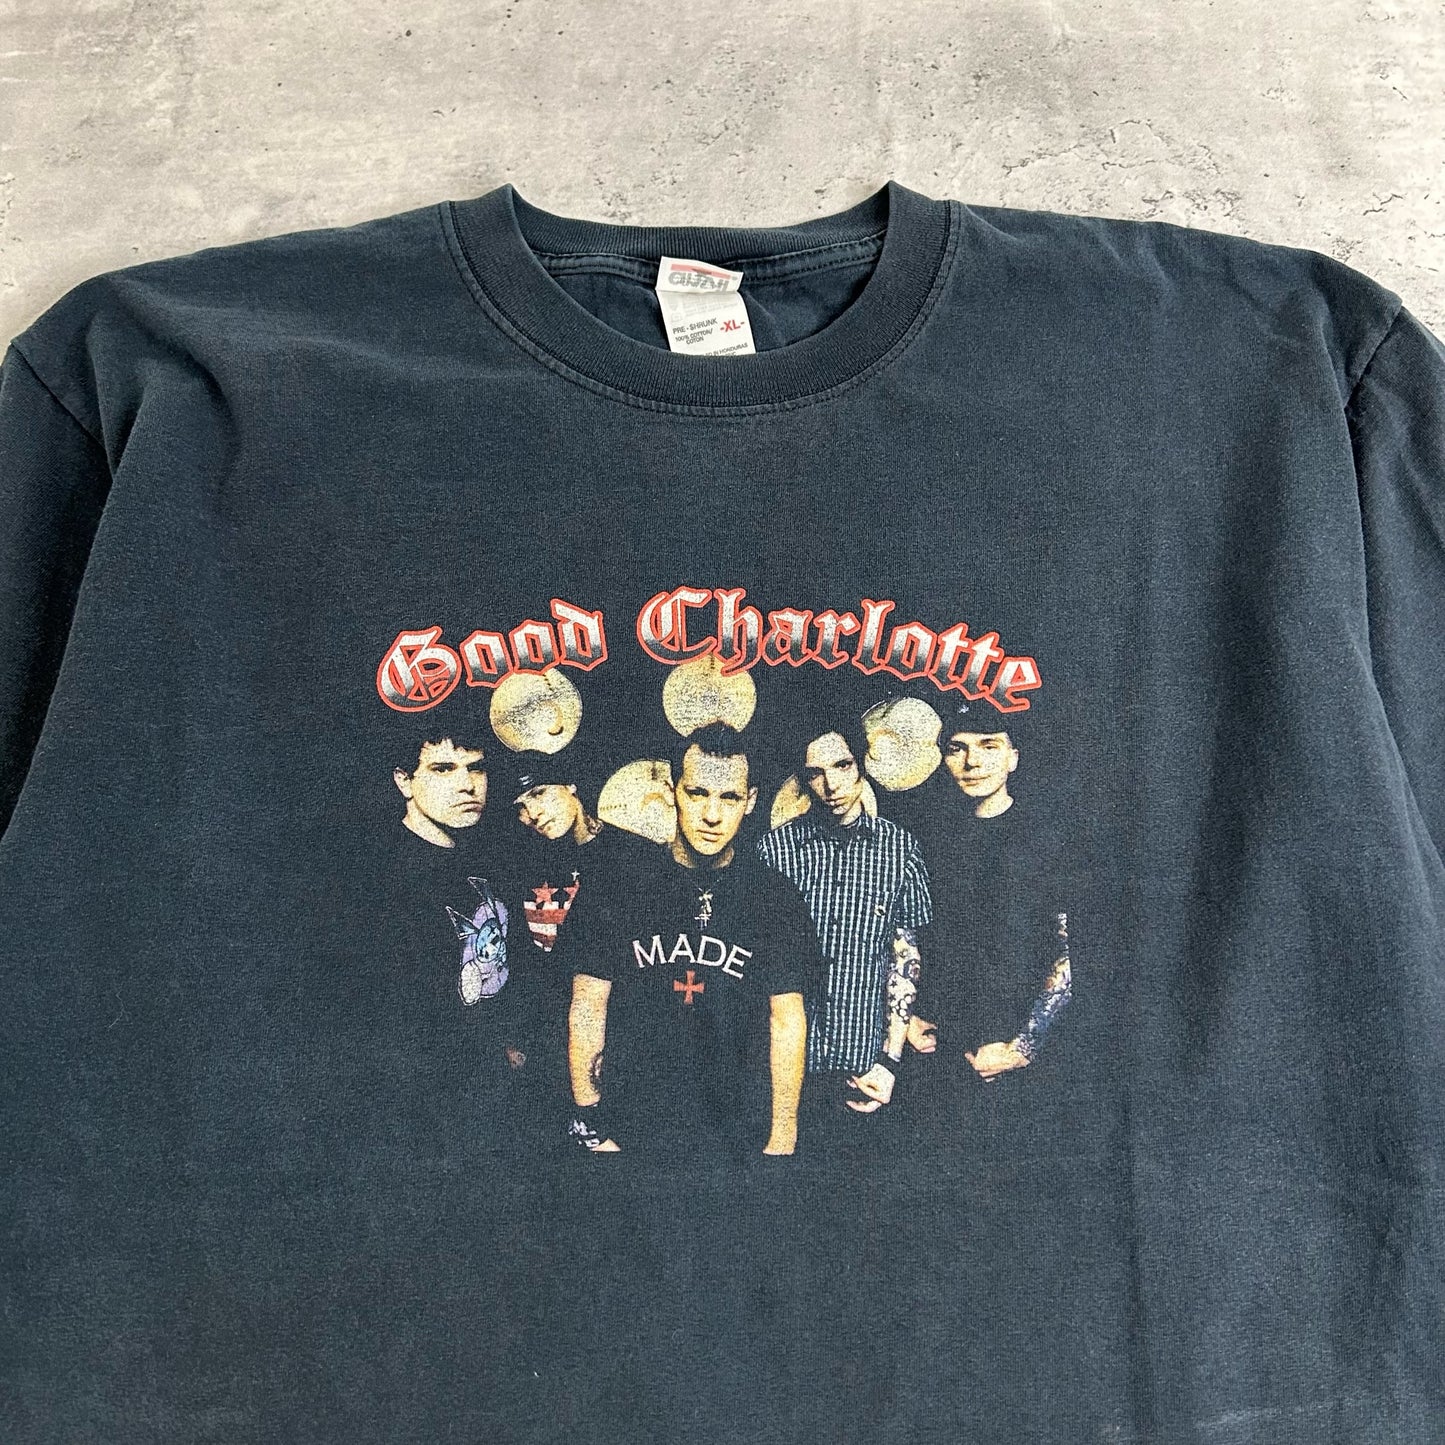 2002 Good Charlotte The Young and Hopeless Tour T-Shirt size XL